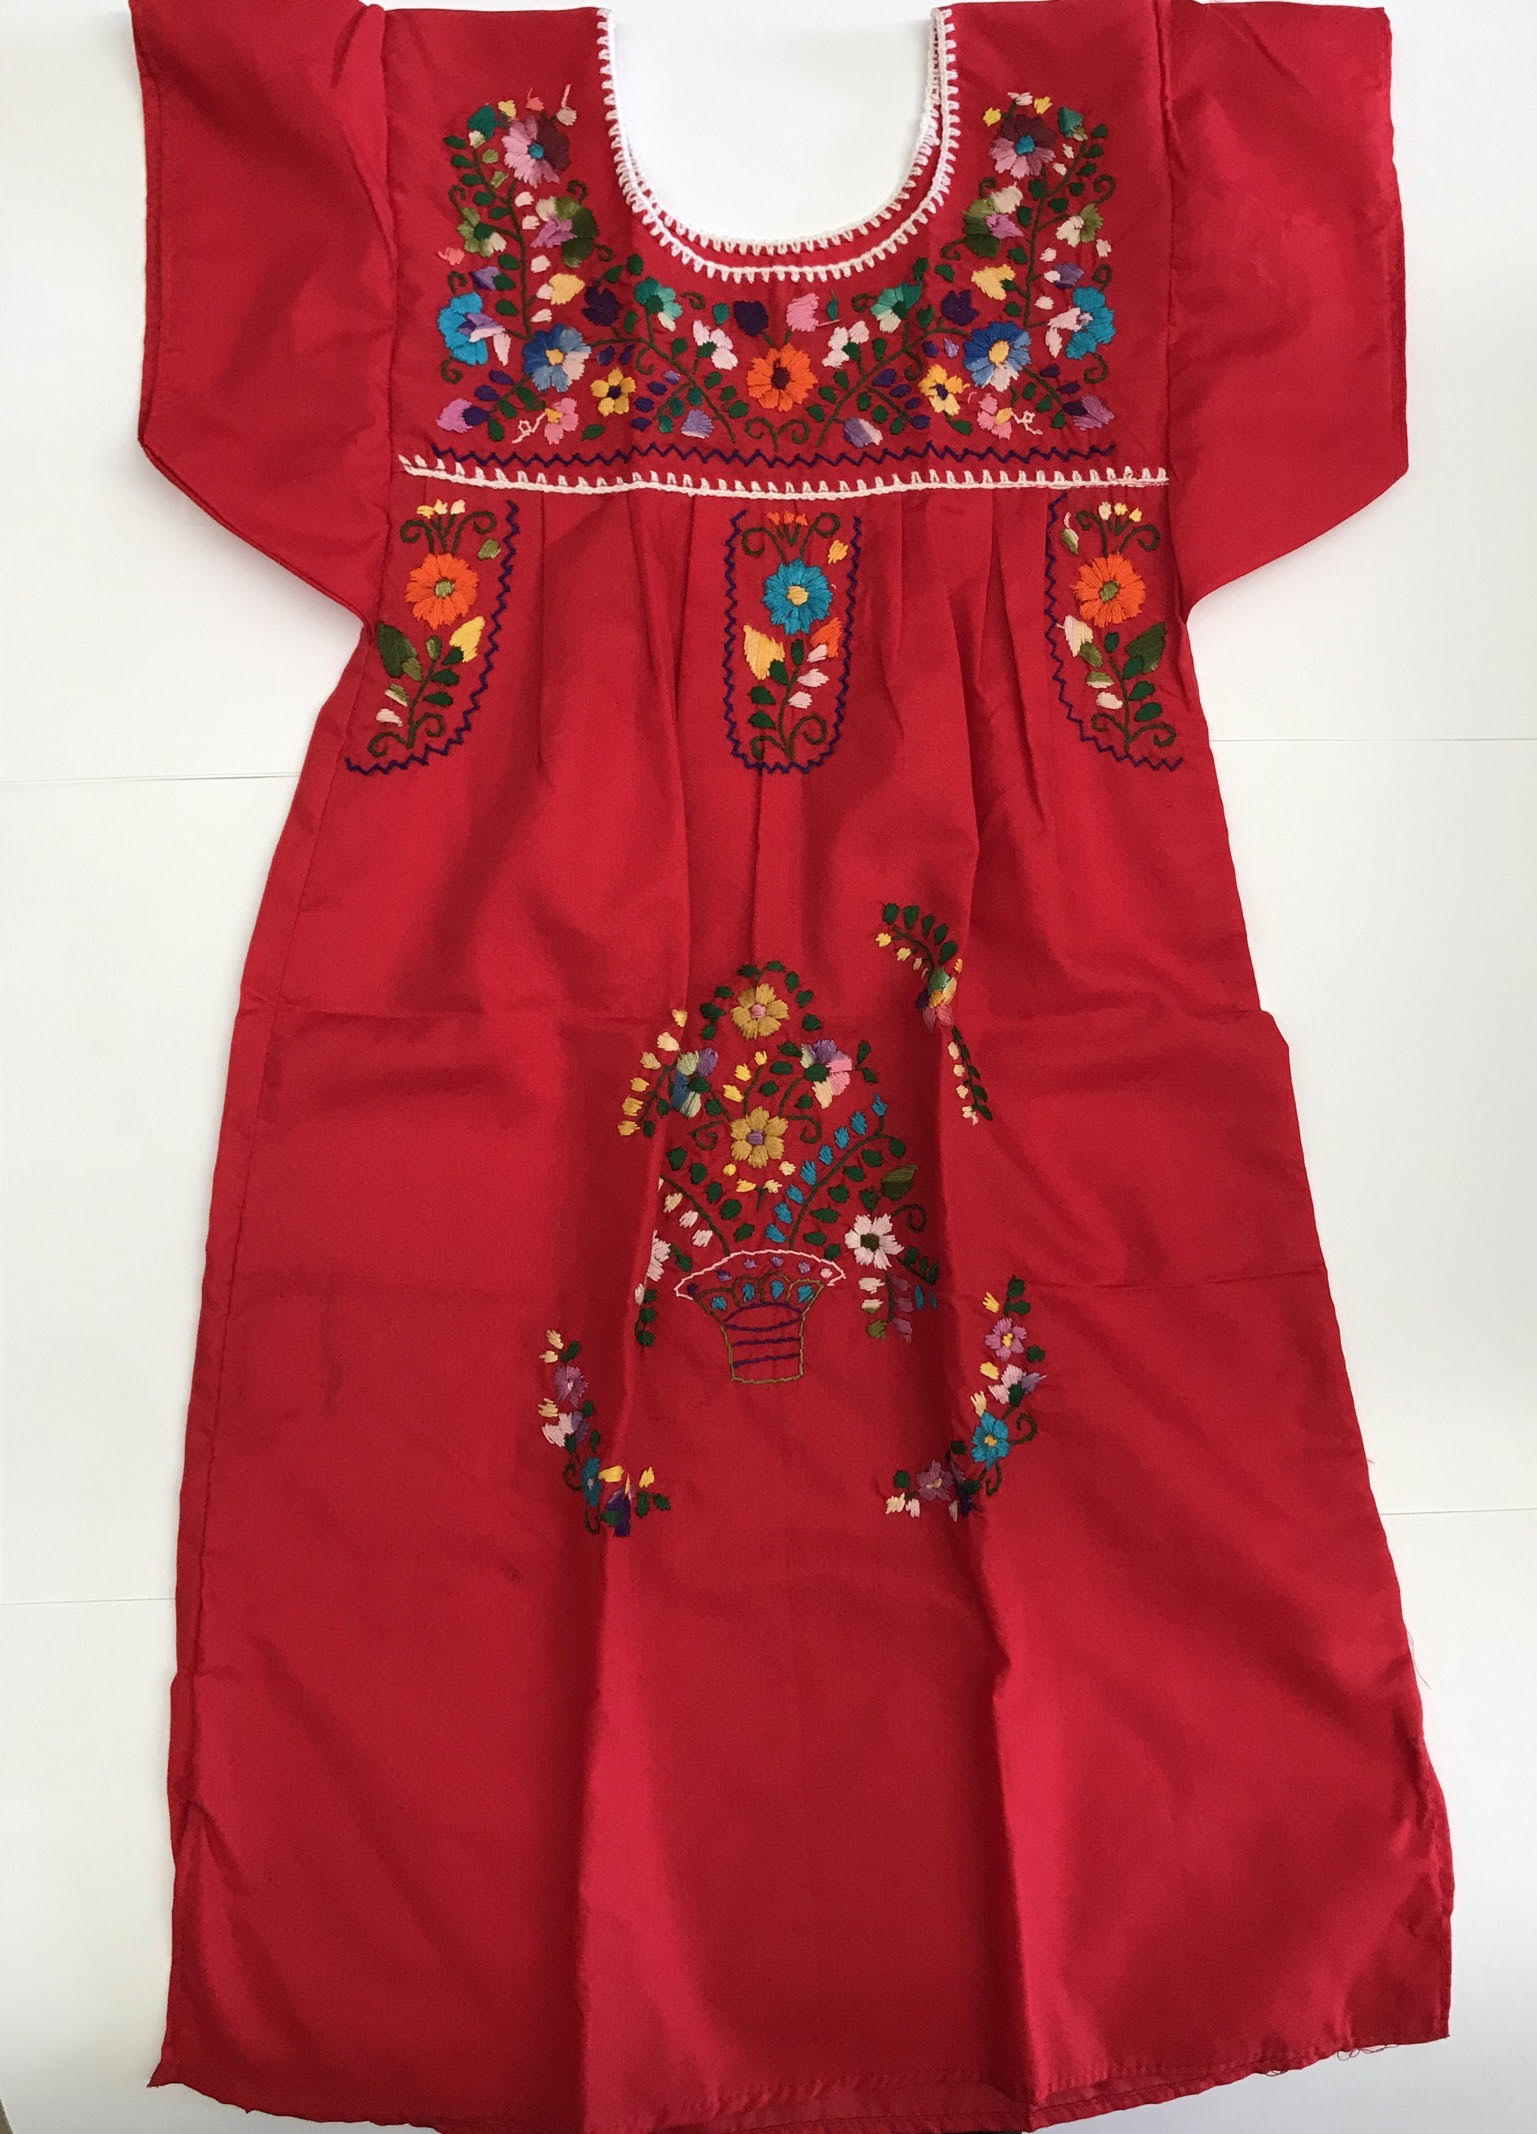 RED SIZE 6 GIRLS DRESS - Rustico Mexicano